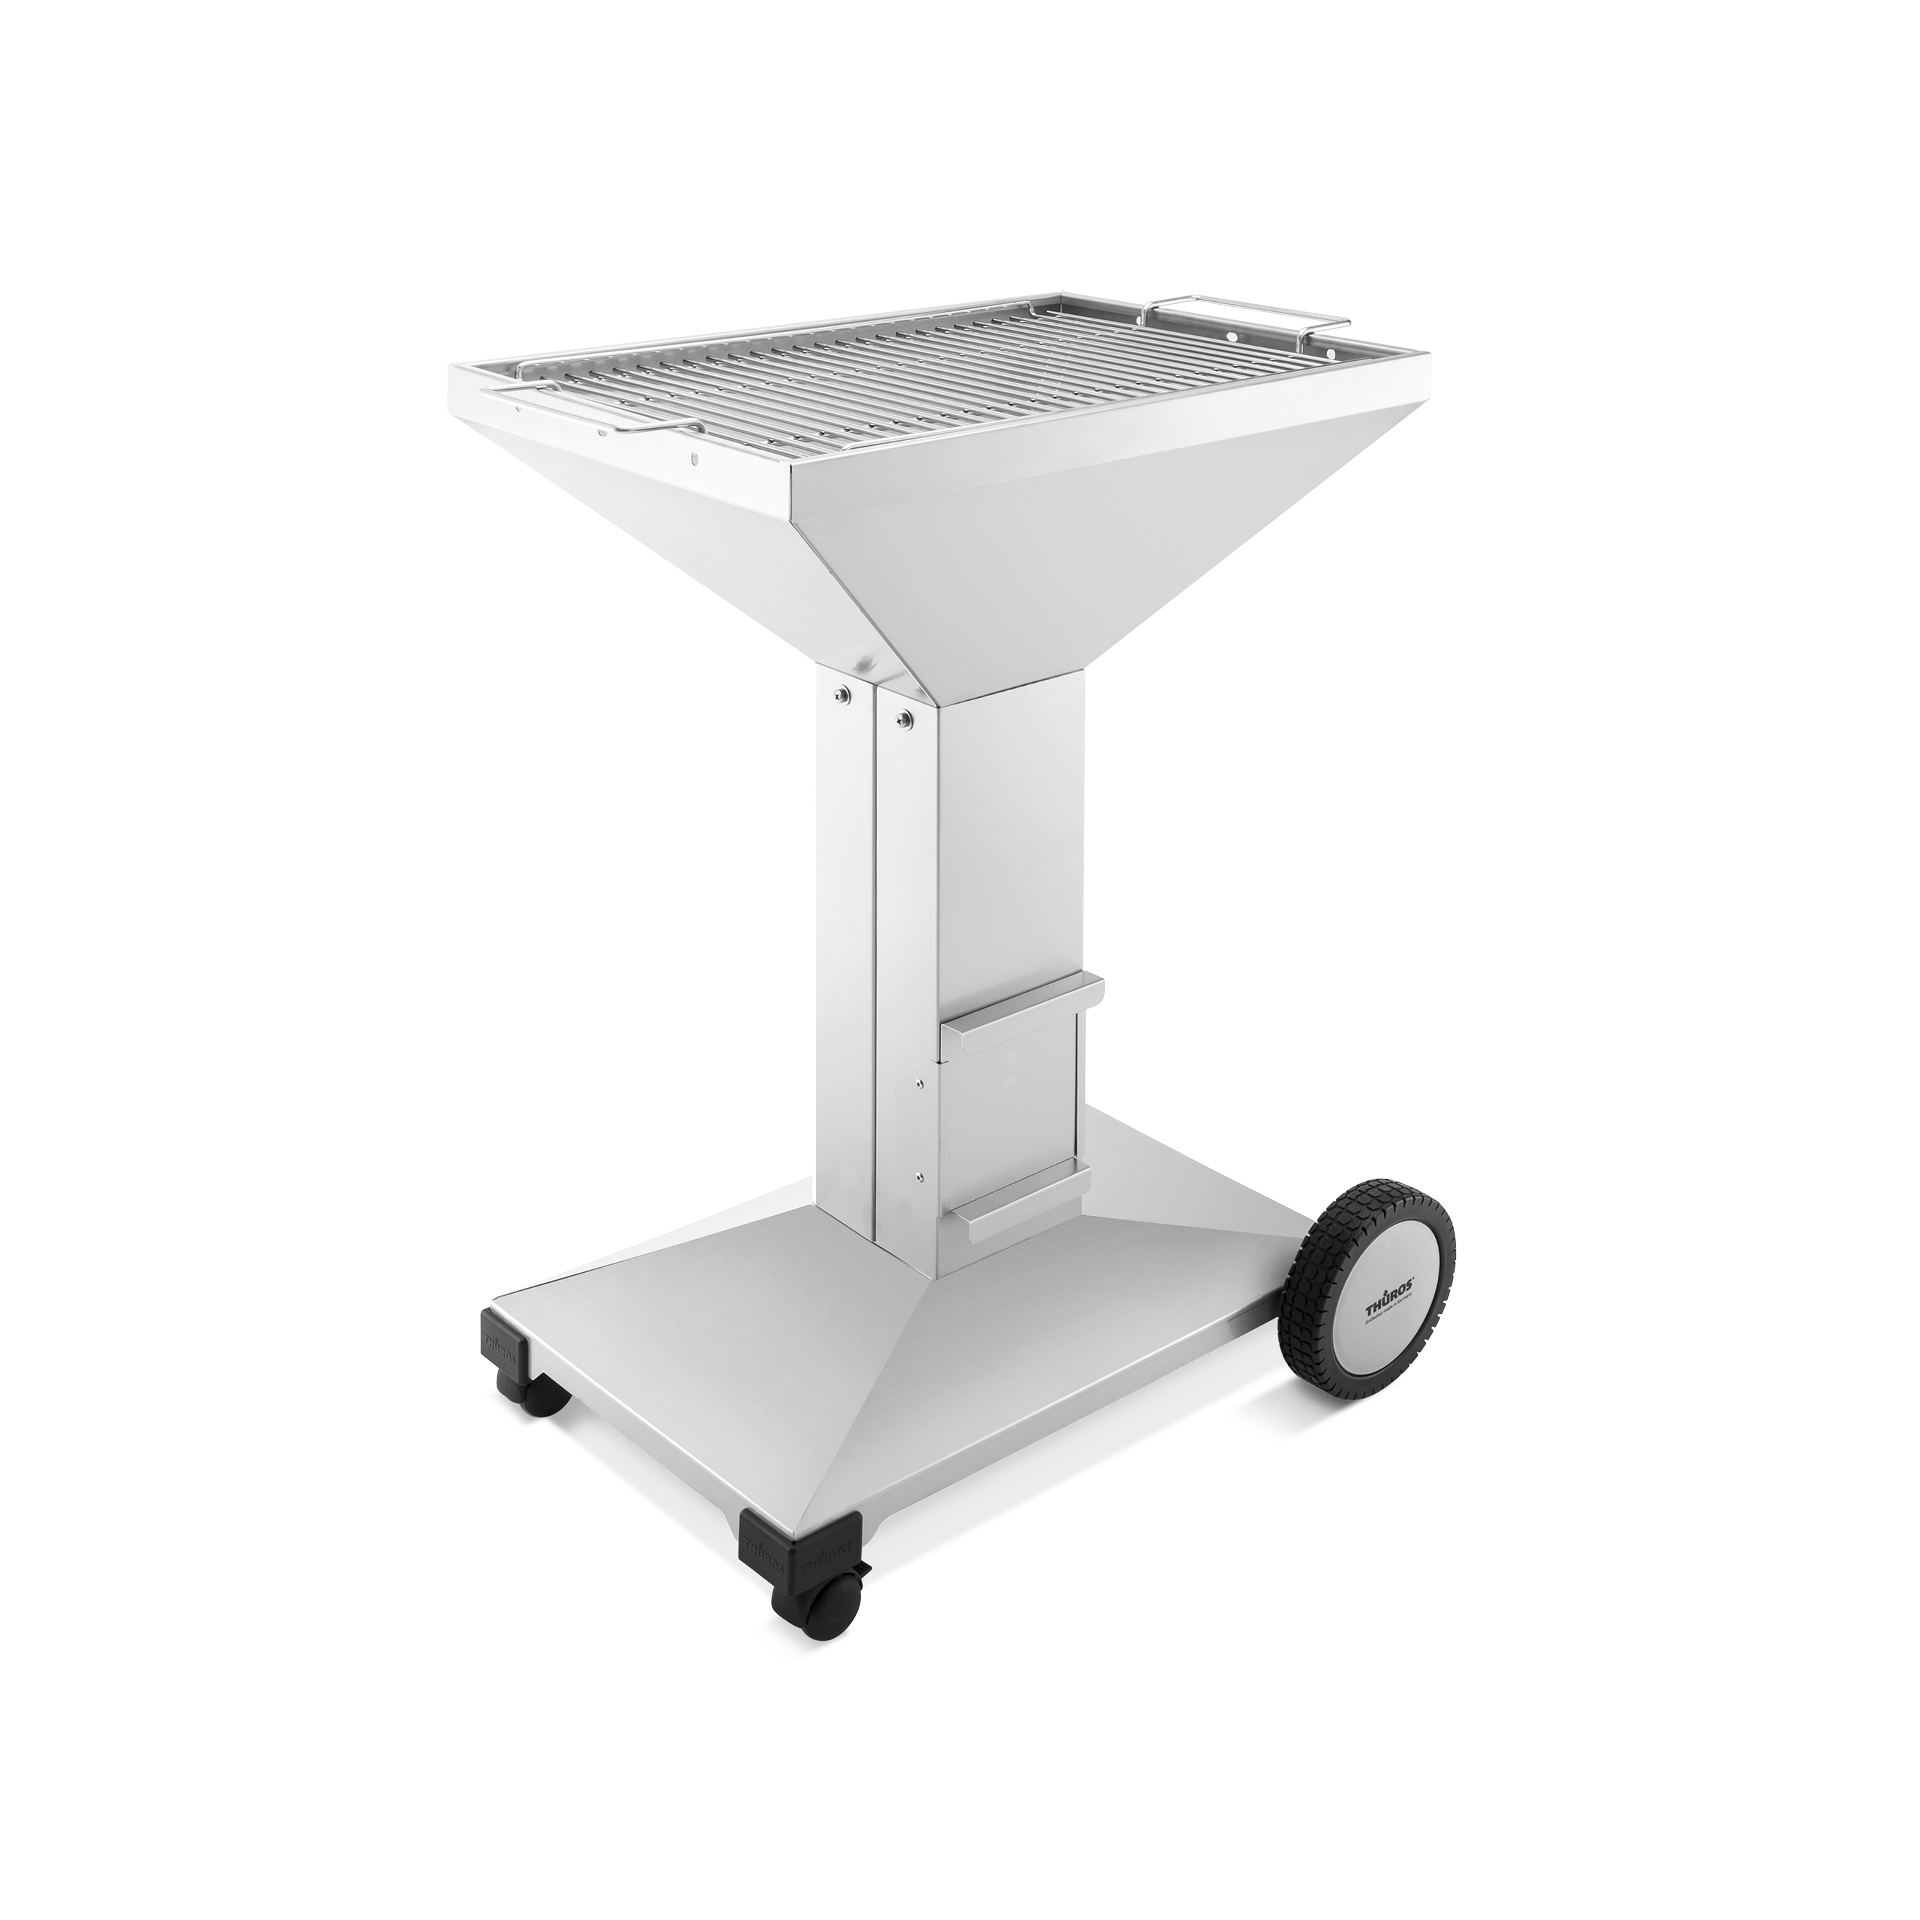 THÜROS T4 Stainless Steel Barbecue Wheeled